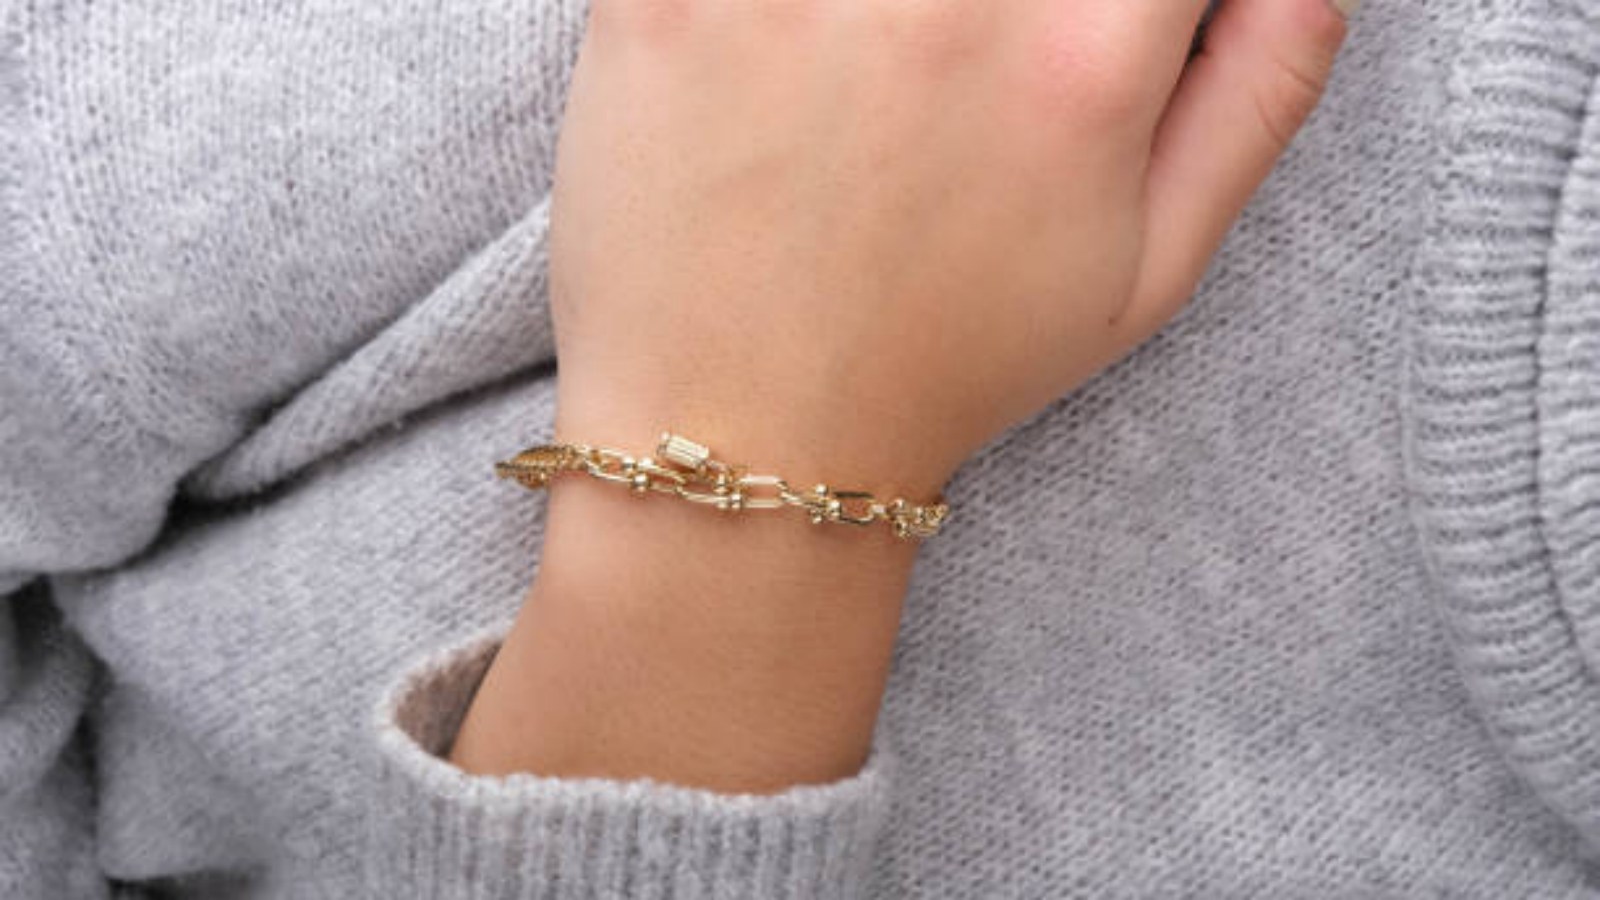 The Beauty and Meaning Behind a Gold Bead Name Bracelet